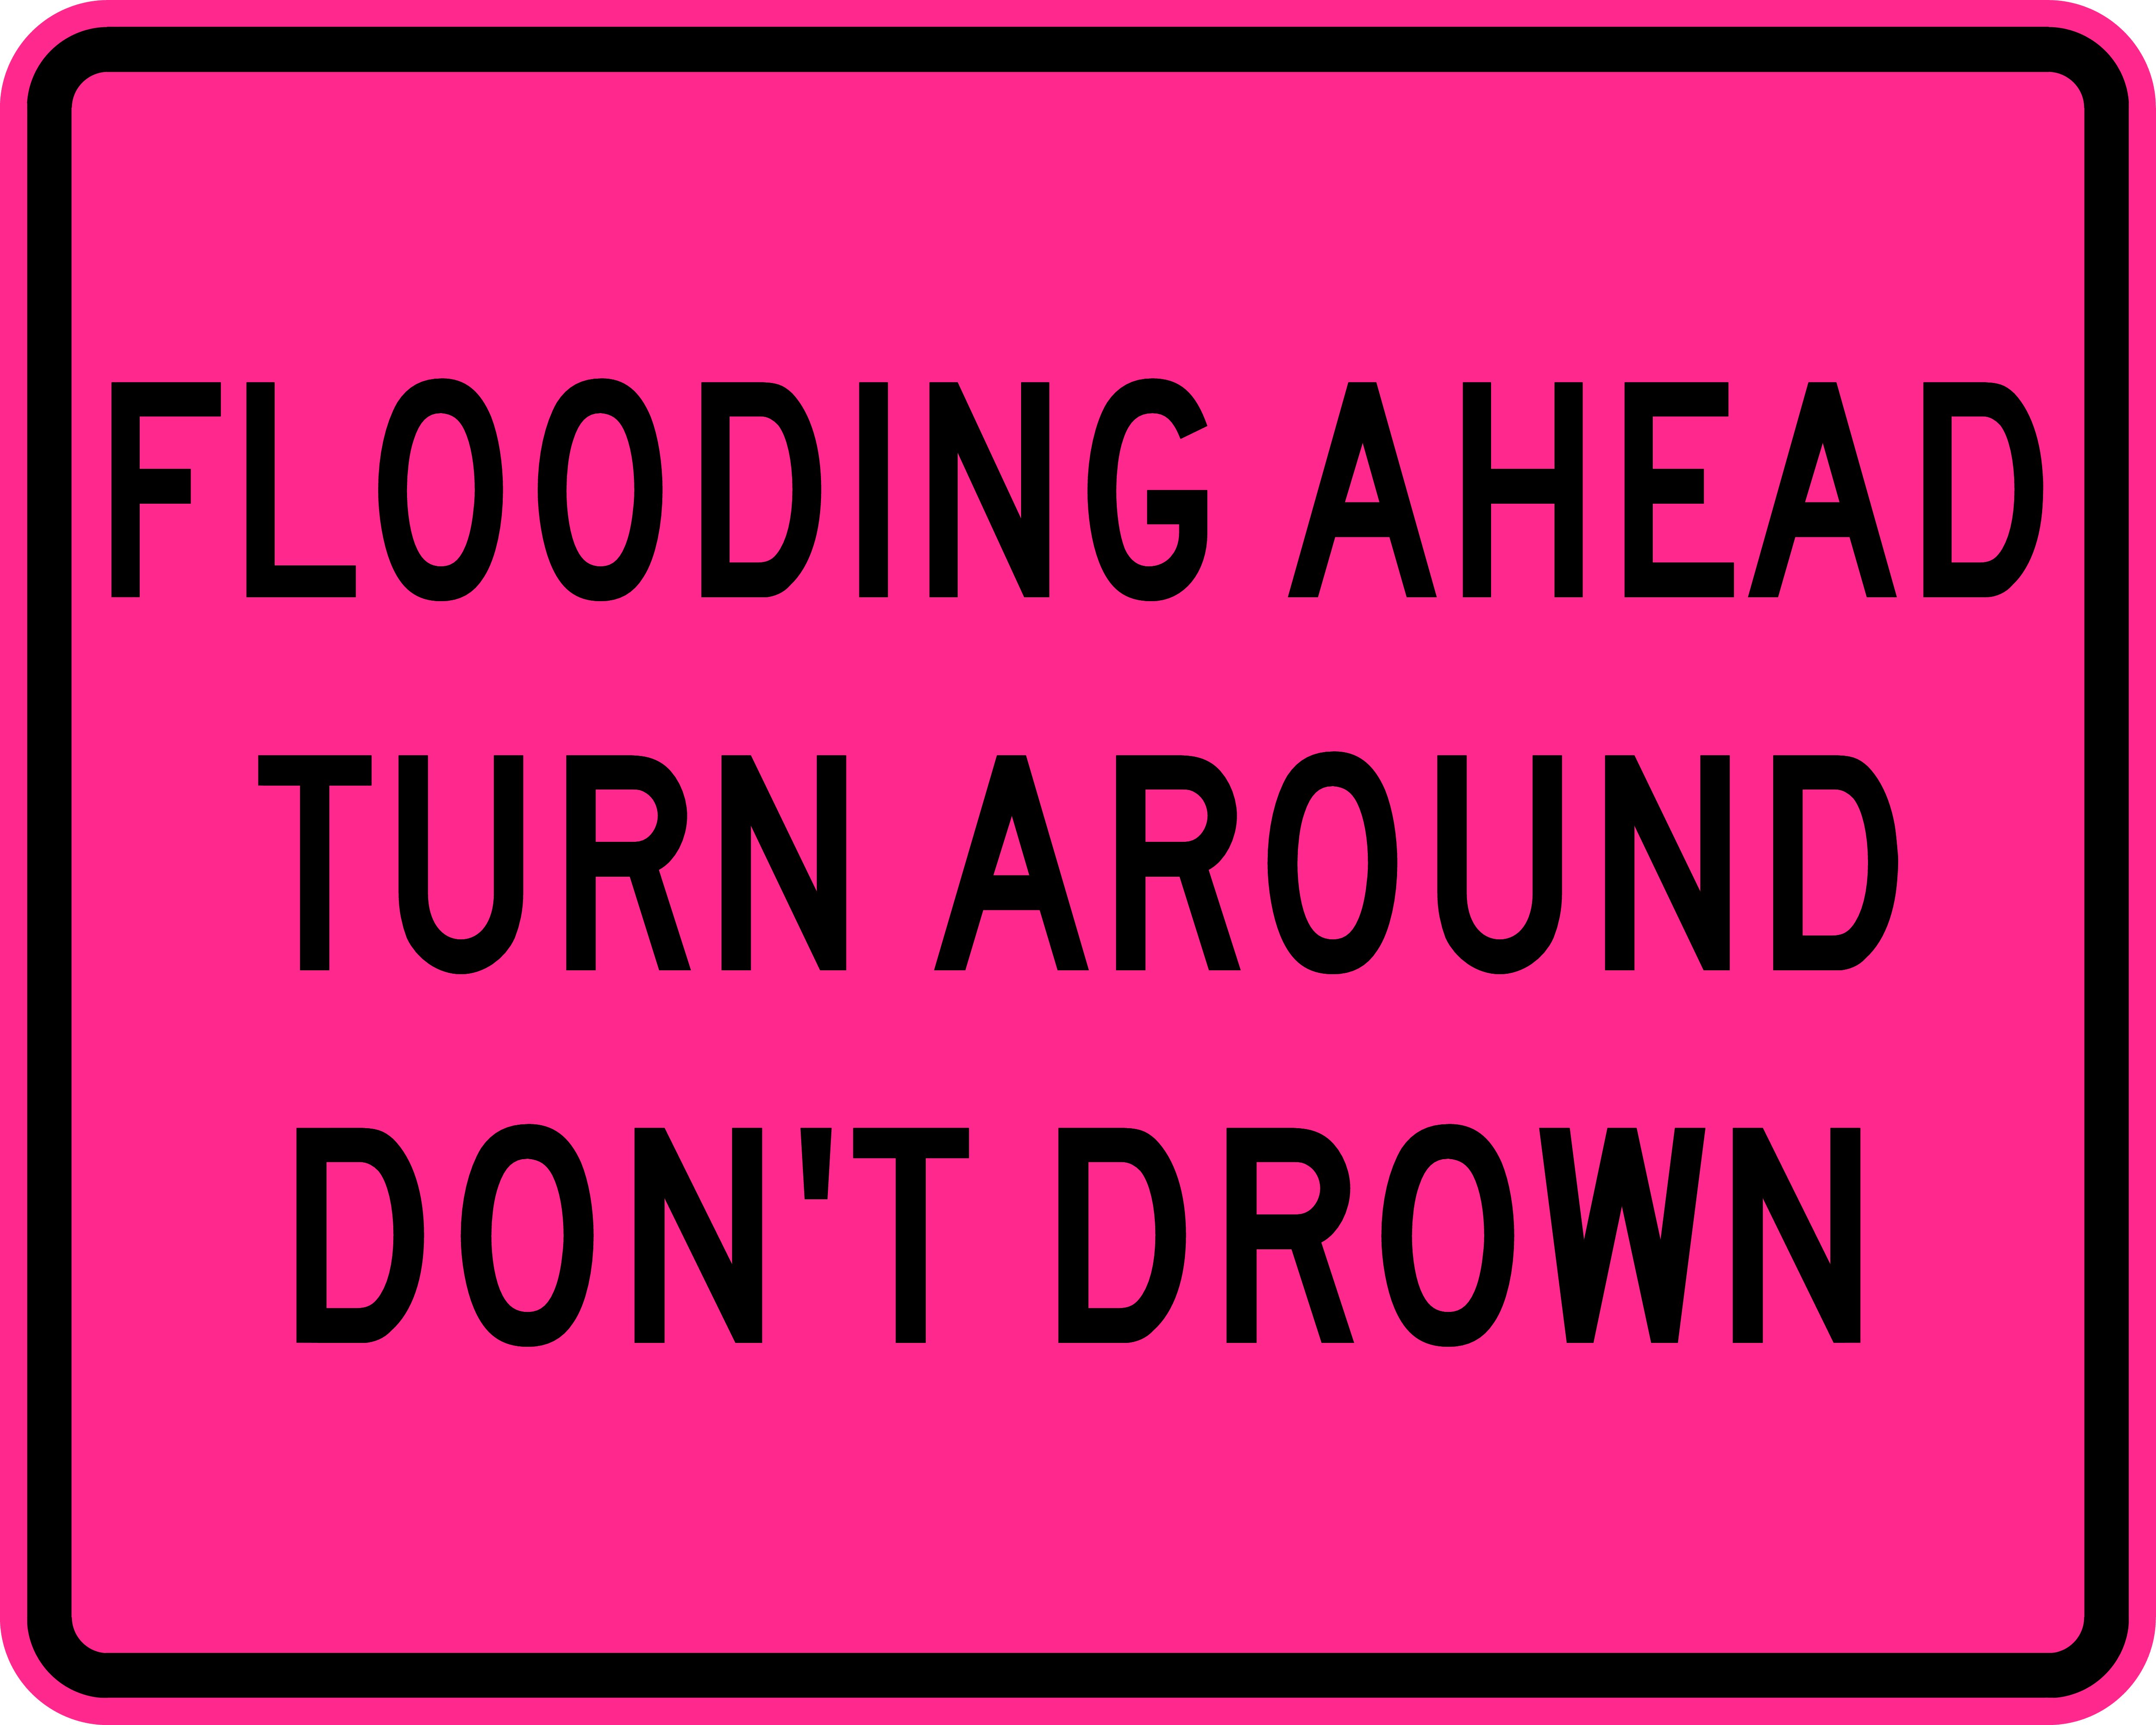 NWS Turn Around Don't Drown Program, Signs and Resources